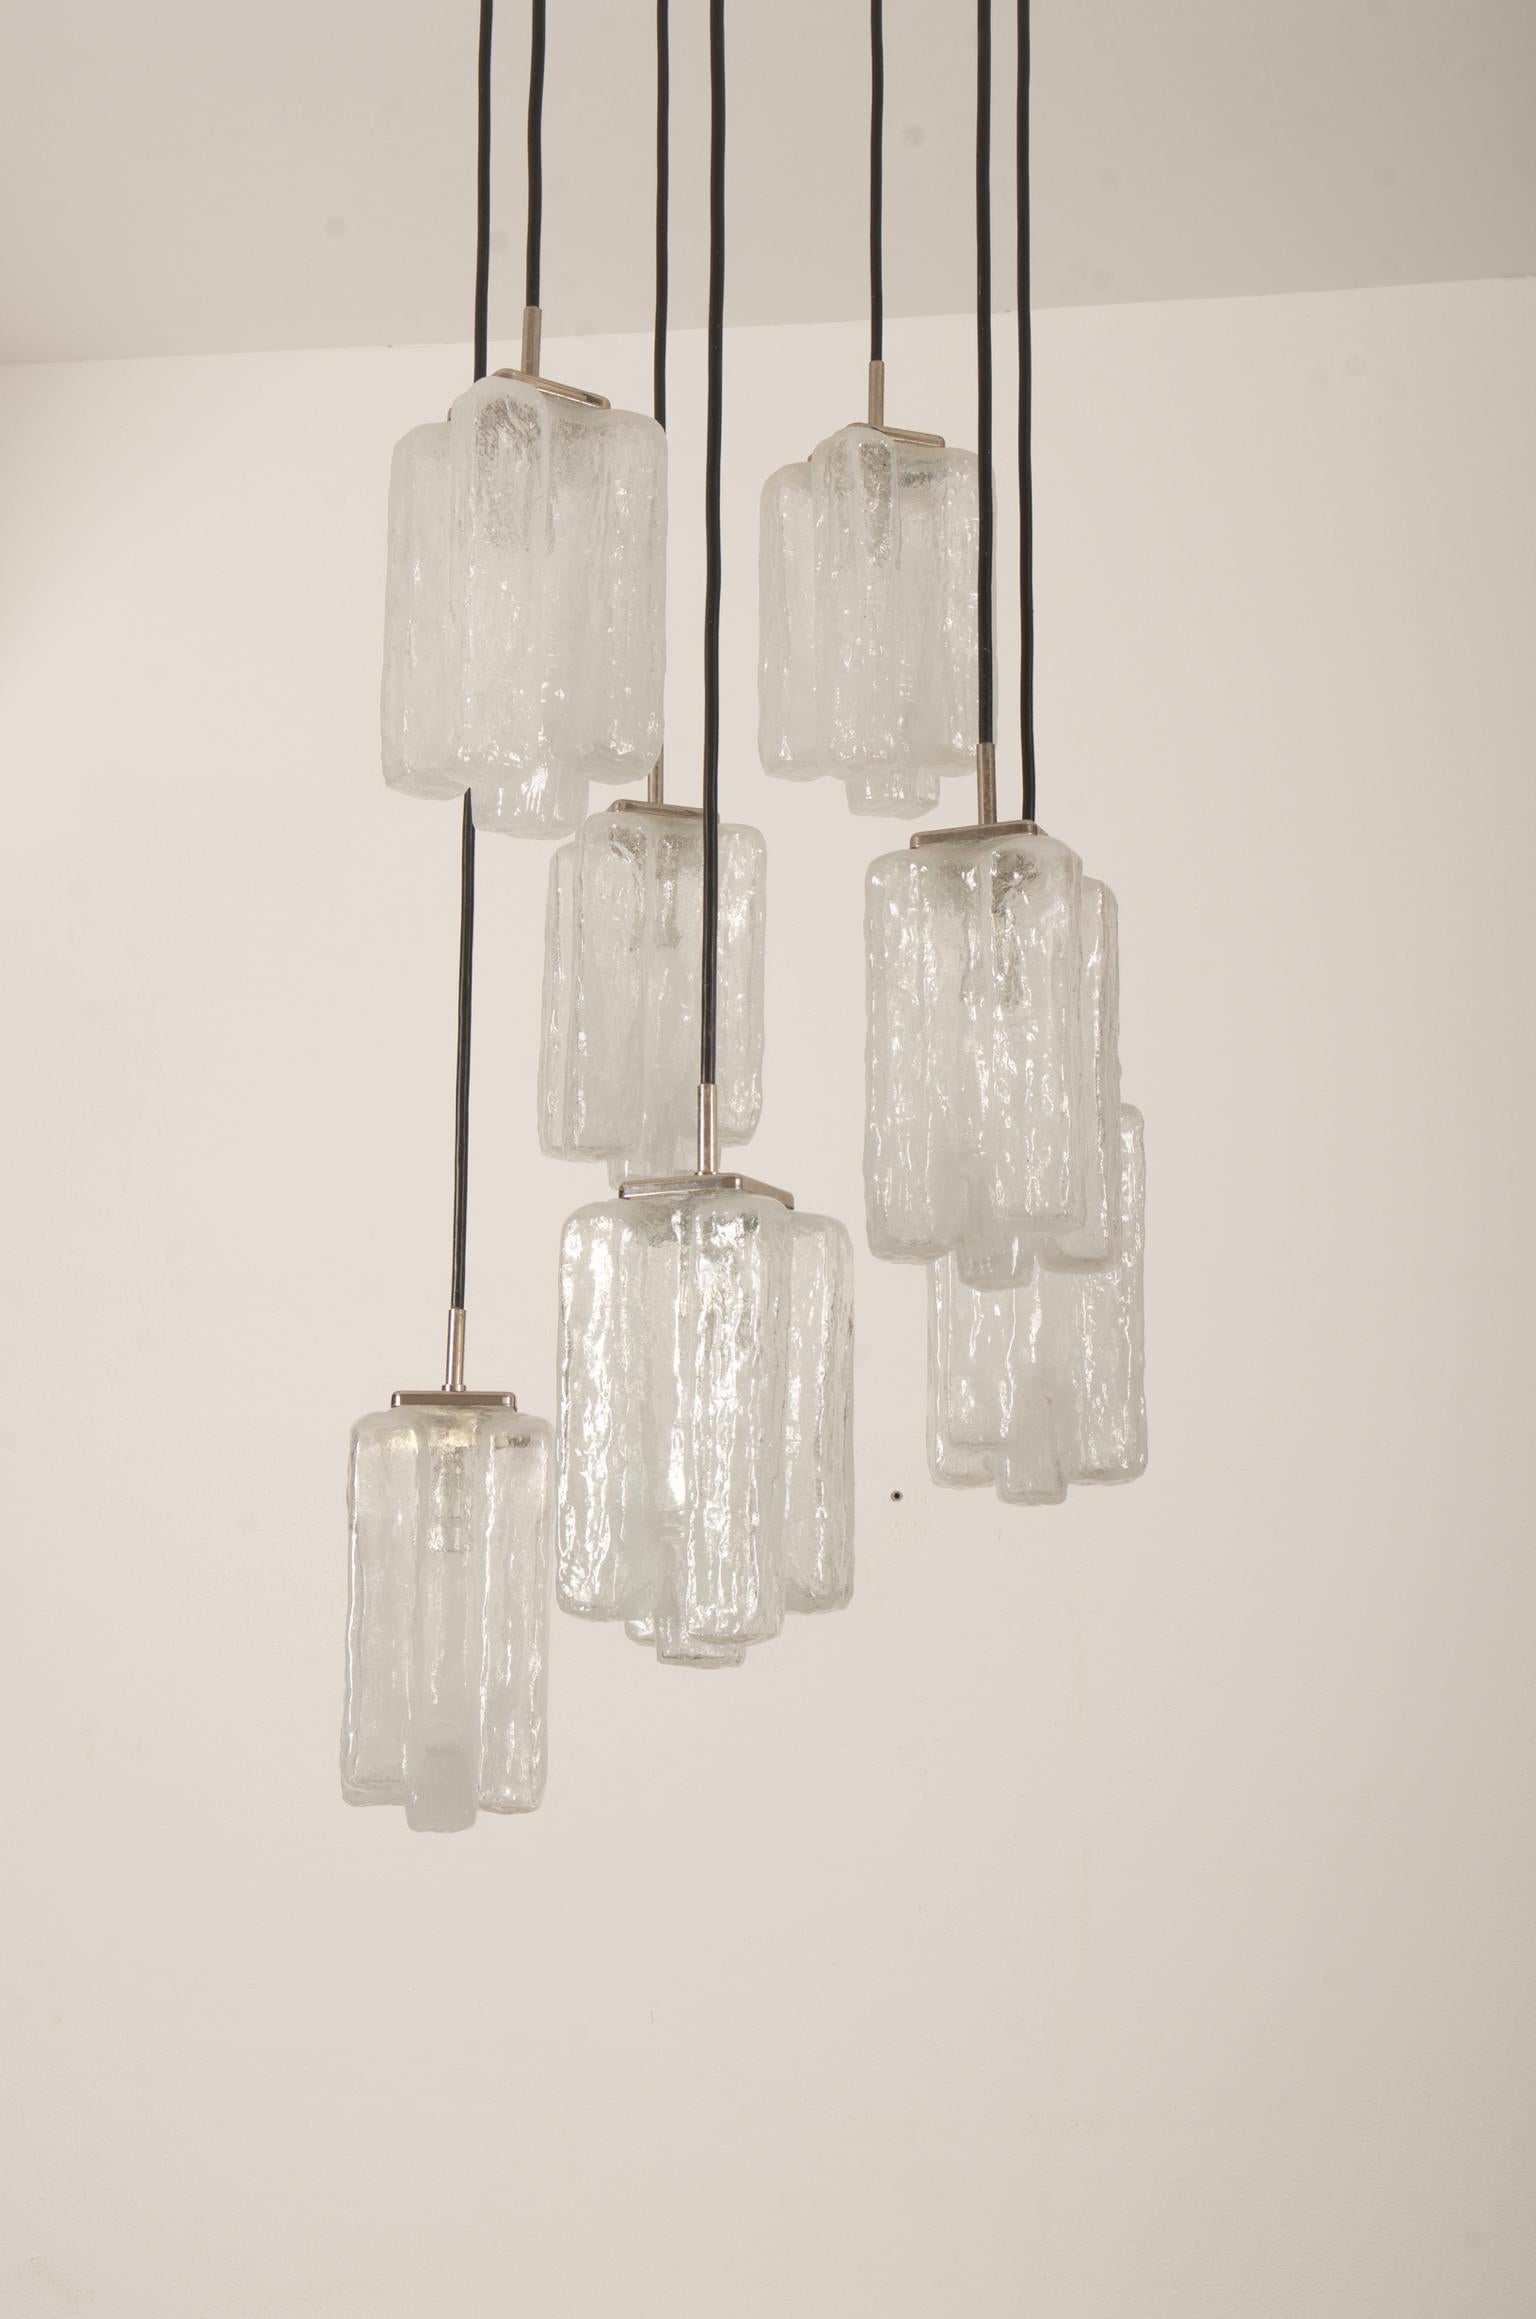 Beautiful chandelier made of nickel-plated brass holders with seven hand blown glass shades, each fitted with E14 sockets. Made by. J.T. Kalmar in the 1970s.